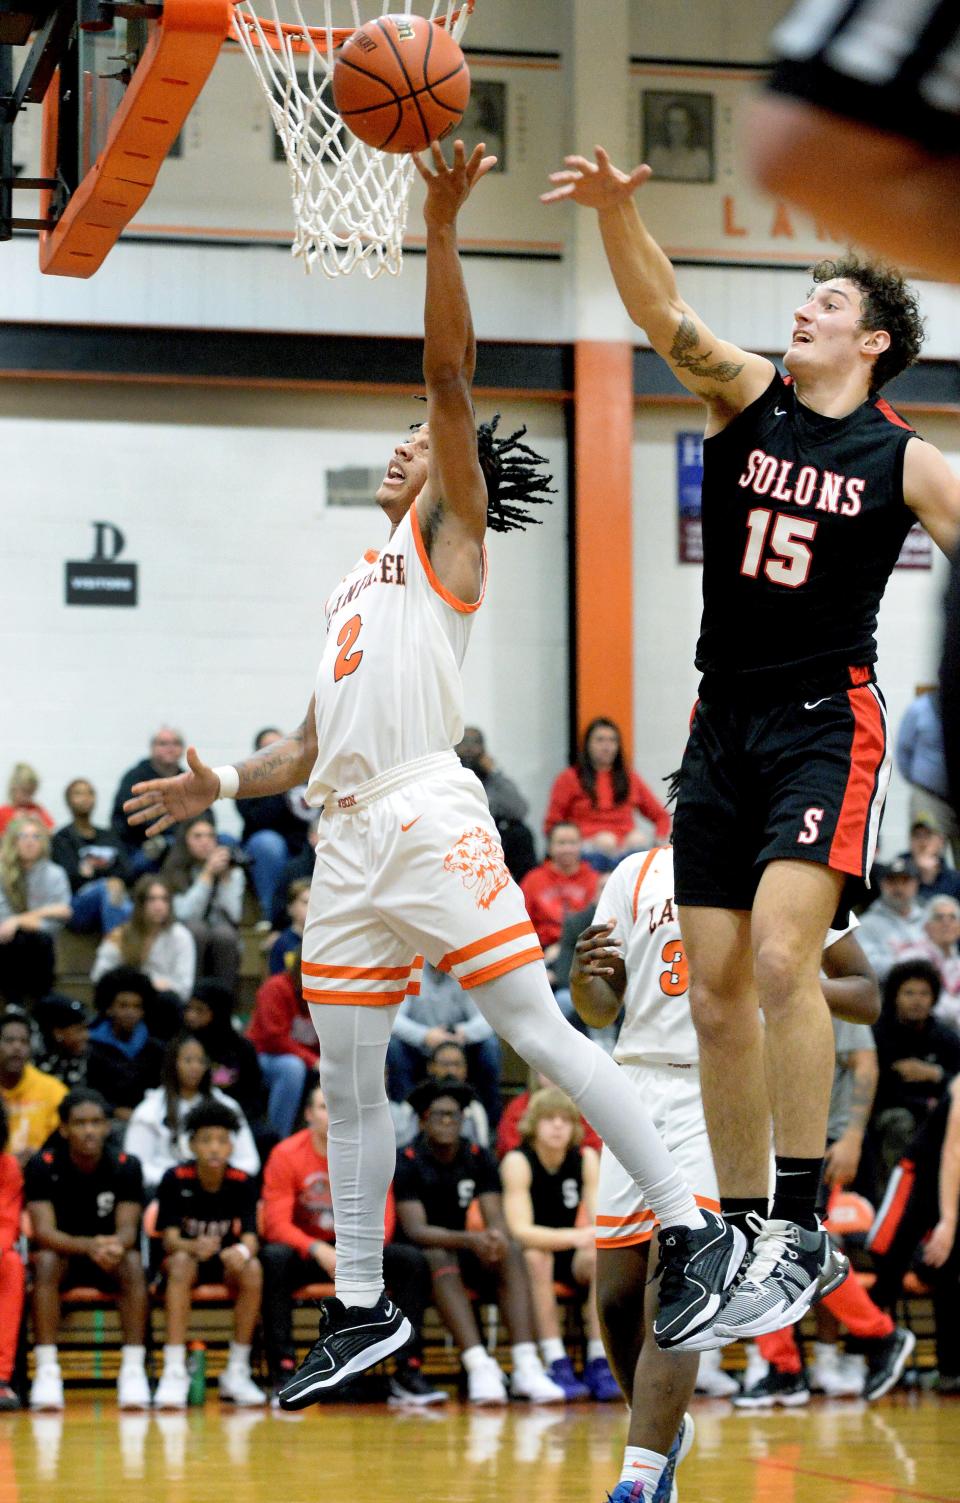 Lanphier's Jessie Bates III goes up for a shot while being guarded by Springfield's Paul Hartman during the game Friday, Dec. 8, 2023.